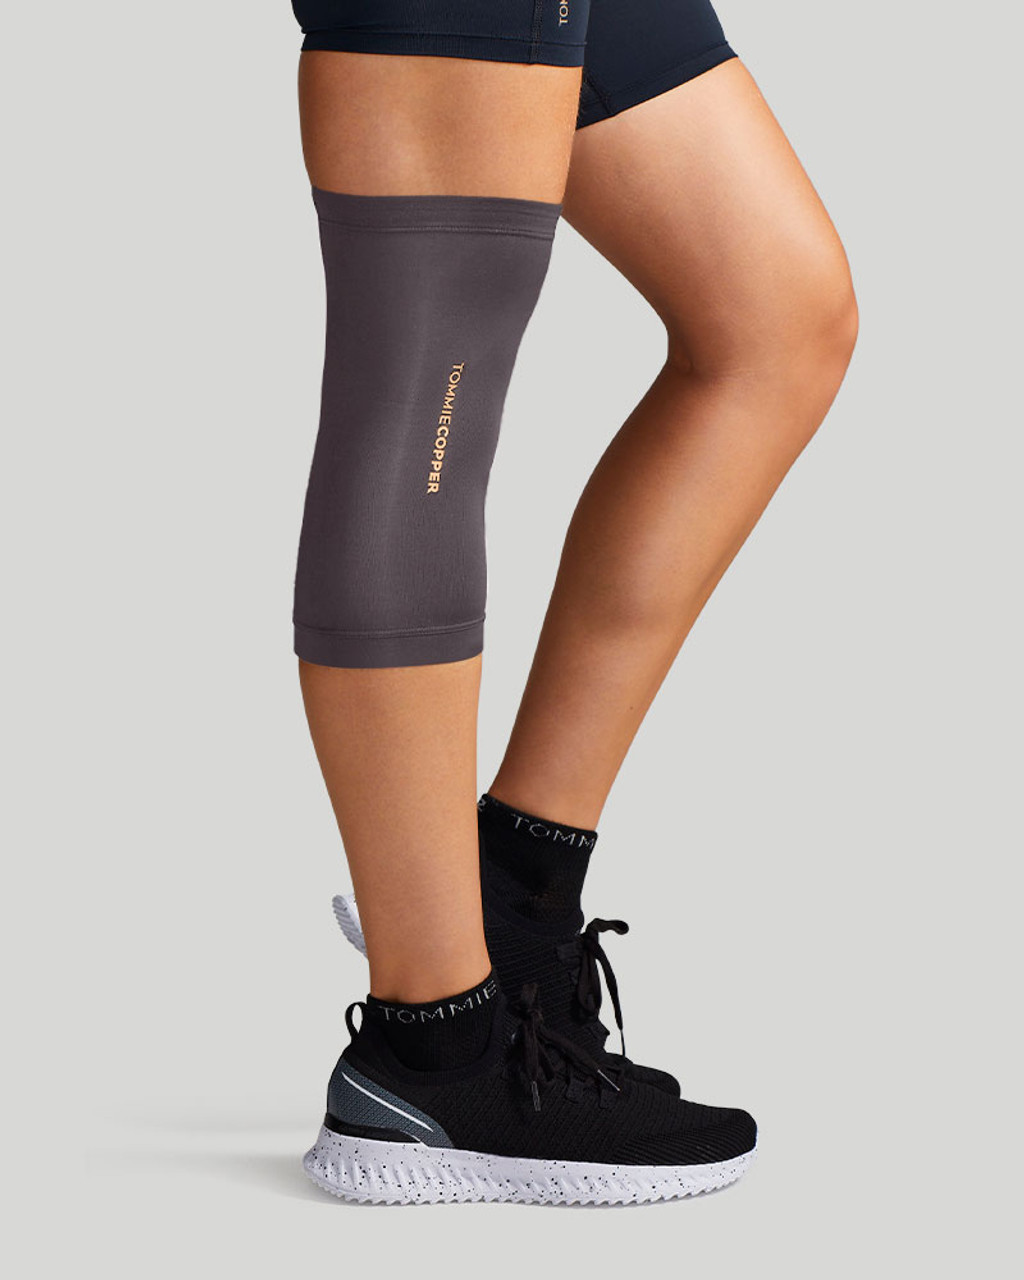 Tommie Copper Knee Sleeve Compression Brace Core Support Pain Relief –  Contino